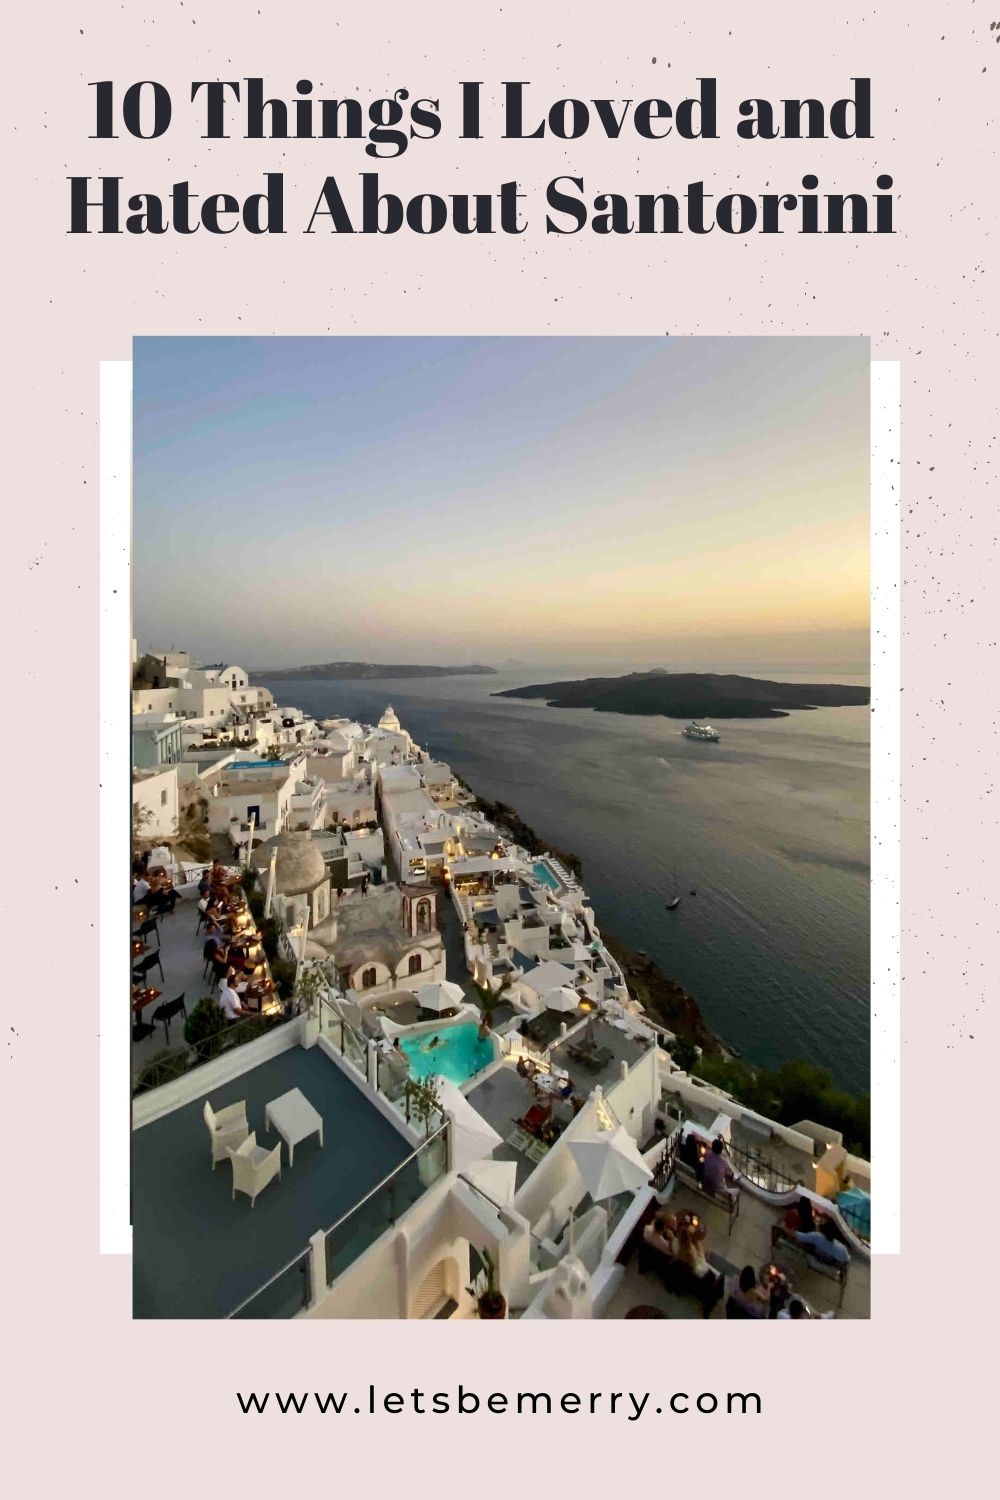 10 Things I Loved and Hated About Santorini